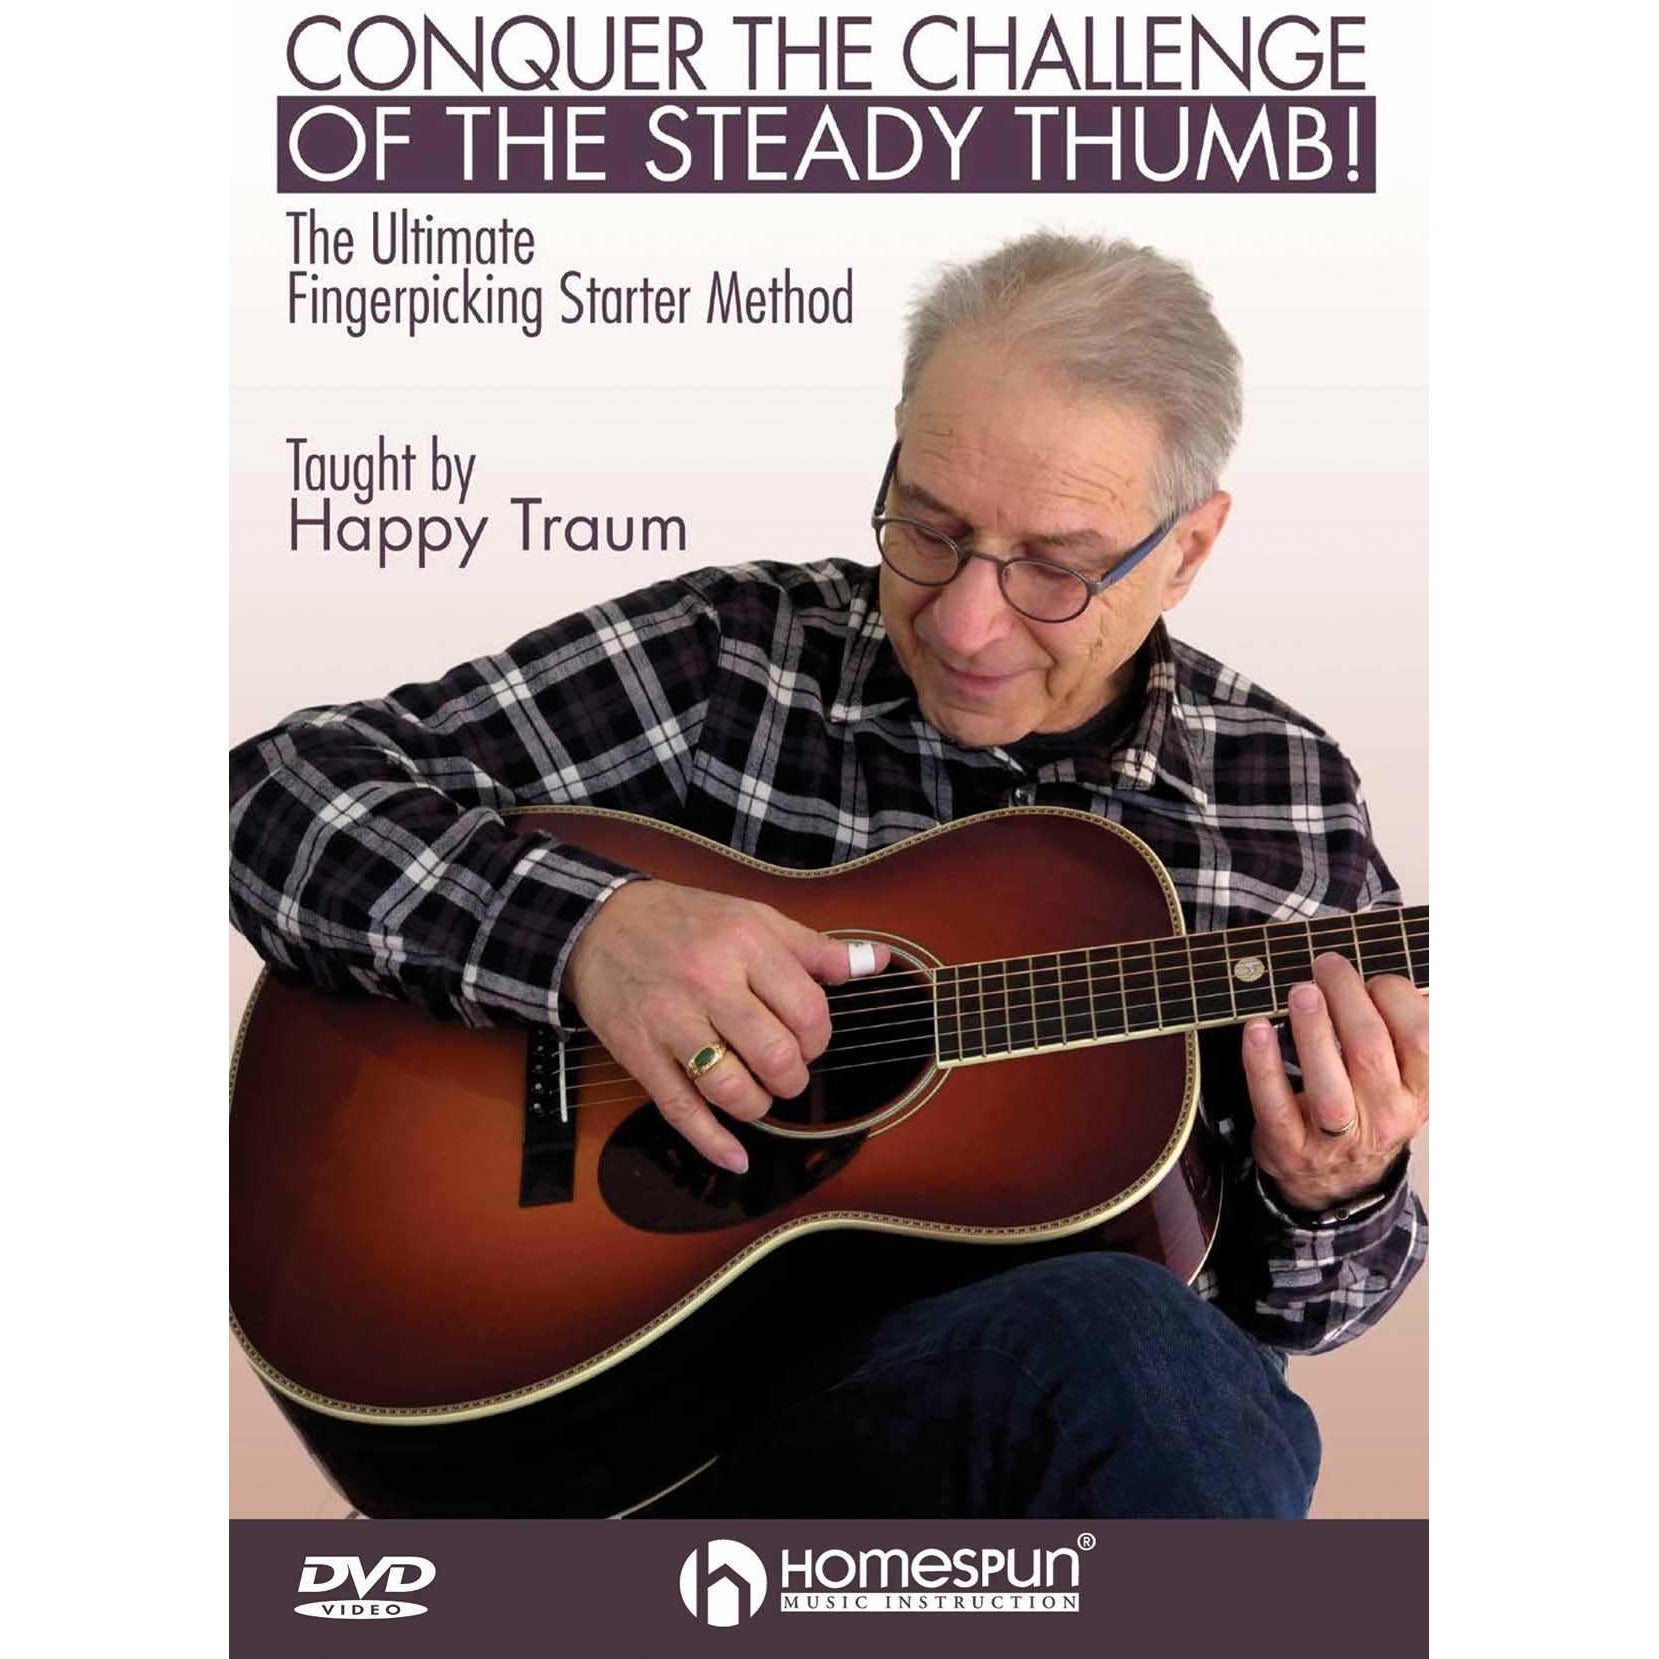 Homespun, DVD - Conquer the Challenge of the Steady Thumb!-The Ultimate Fingerpicking Starter Method